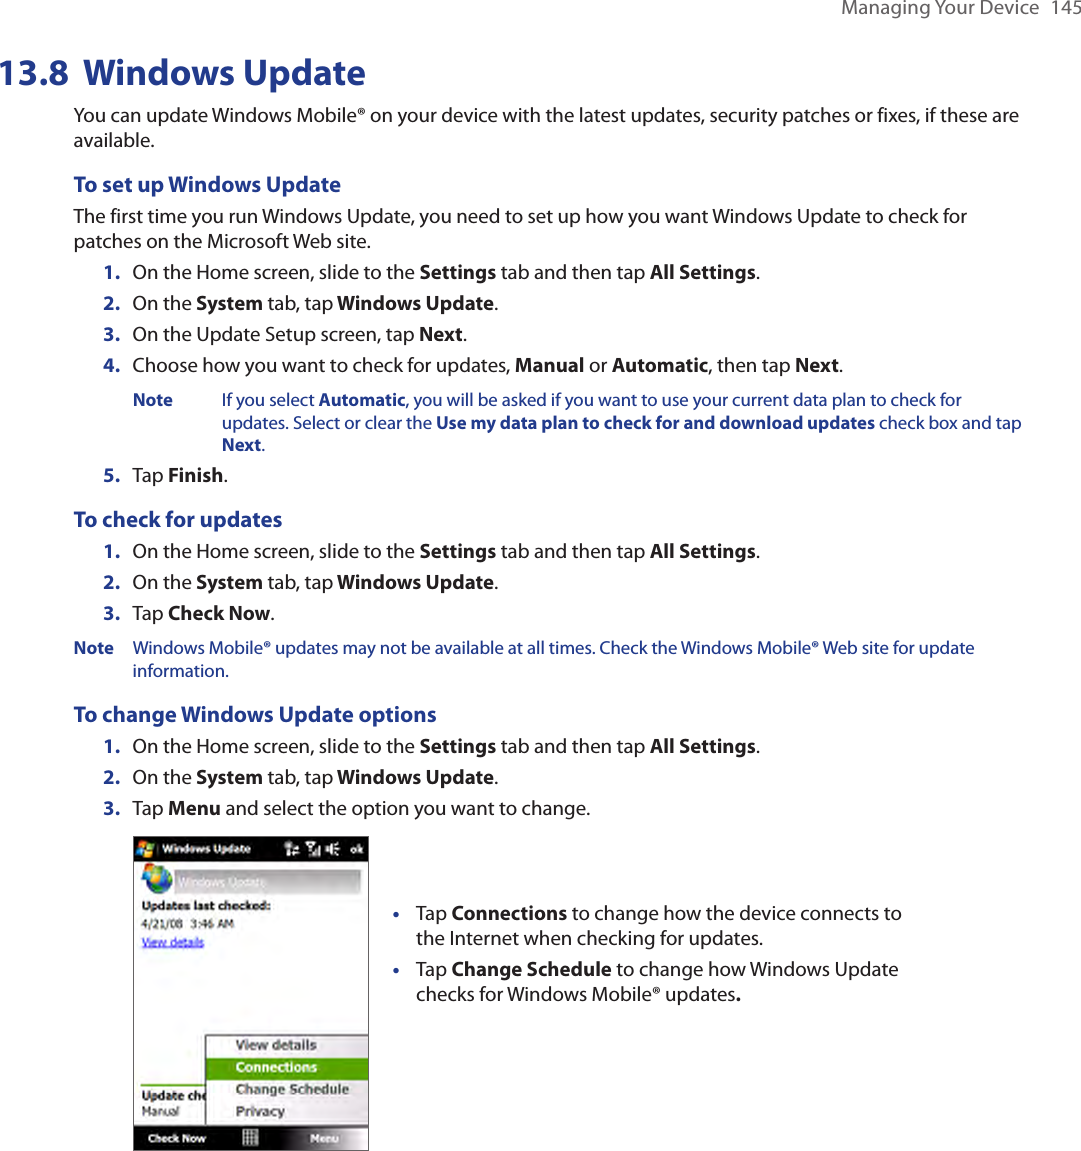 Managing Your Device  14513.8  Windows UpdateYou can update Windows Mobile® on your device with the latest updates, security patches or fixes, if these are available.To set up Windows UpdateThe first time you run Windows Update, you need to set up how you want Windows Update to check for patches on the Microsoft Web site.1.  On the Home screen, slide to the Settings tab and then tap All Settings. 2.  On the System tab, tap Windows Update.3.  On the Update Setup screen, tap Next.4.  Choose how you want to check for updates, Manual or Automatic, then tap Next.   Note  If you select Automatic, you will be asked if you want to use your current data plan to check for        updates. Select or clear the Use my data plan to check for and download updates check box and tap      Next.5.  Tap Finish.To check for updates1.  On the Home screen, slide to the Settings tab and then tap All Settings. 2.  On the System tab, tap Windows Update.3.  Tap Check Now.Note  Windows Mobile® updates may not be available at all times. Check the Windows Mobile® Web site for update information.To change Windows Update options1.  On the Home screen, slide to the Settings tab and then tap All Settings. 2.  On the System tab, tap Windows Update.3.  Tap Menu and select the option you want to change. Tap Connections to change how the device connects to the Internet when checking for updates.Tap Change Schedule to change how Windows Update checks for Windows Mobile® updates. ••